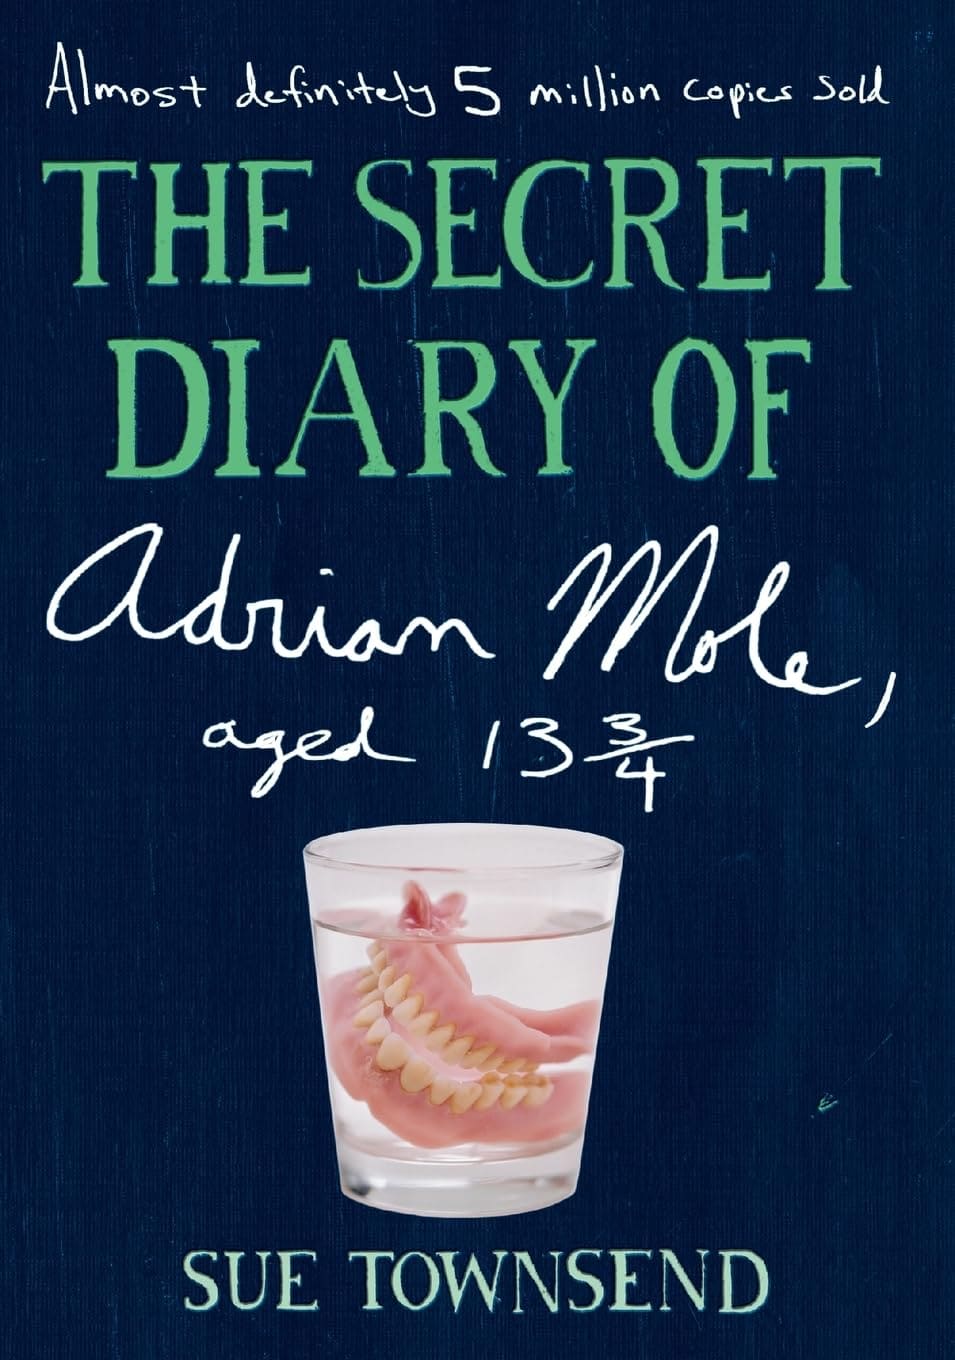 The Secret Diary of Adrian Mole, Aged 13 ¾ by Sue Townsend (1982)